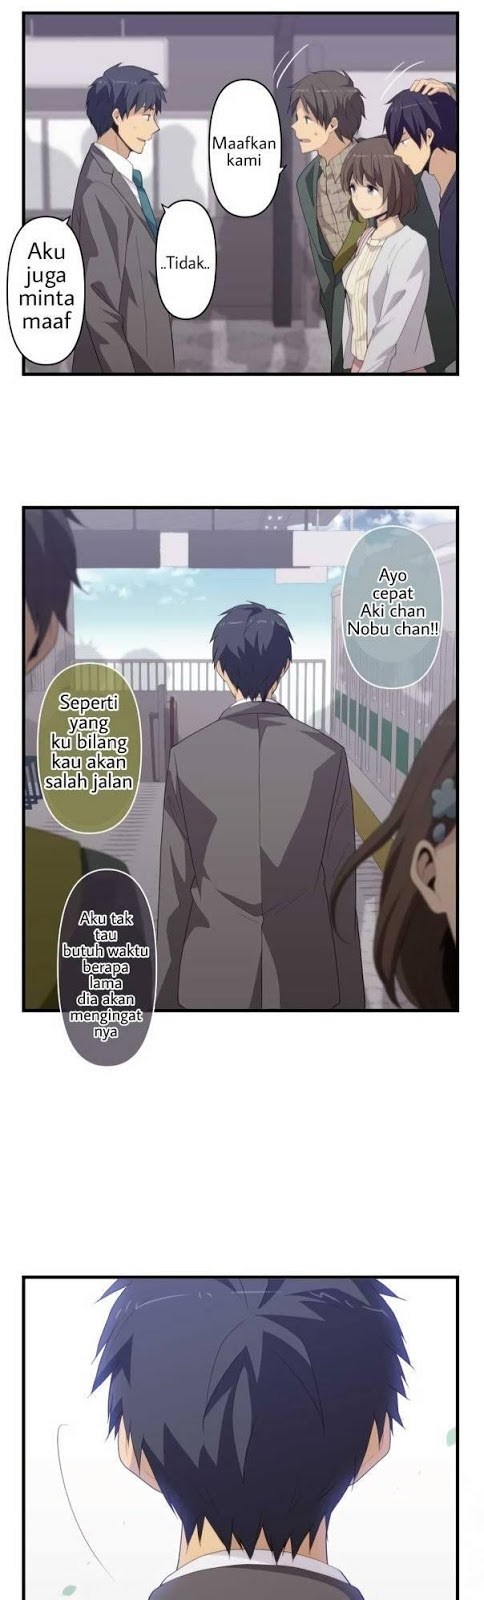 ReLIFE Chapter 217